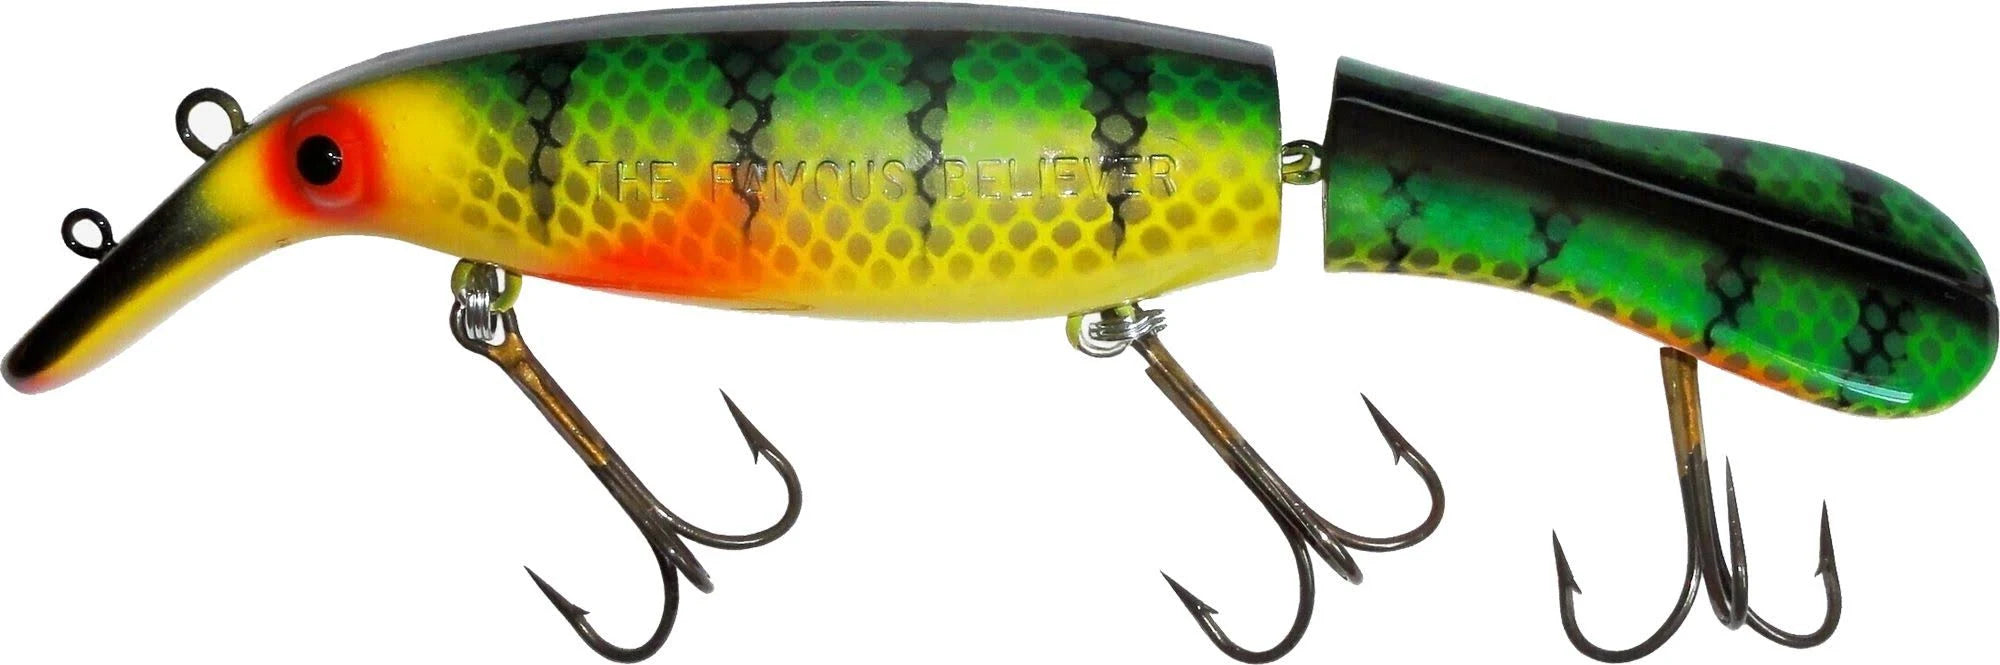 Drifter Tackle Believer Jointed Musky Crankbait